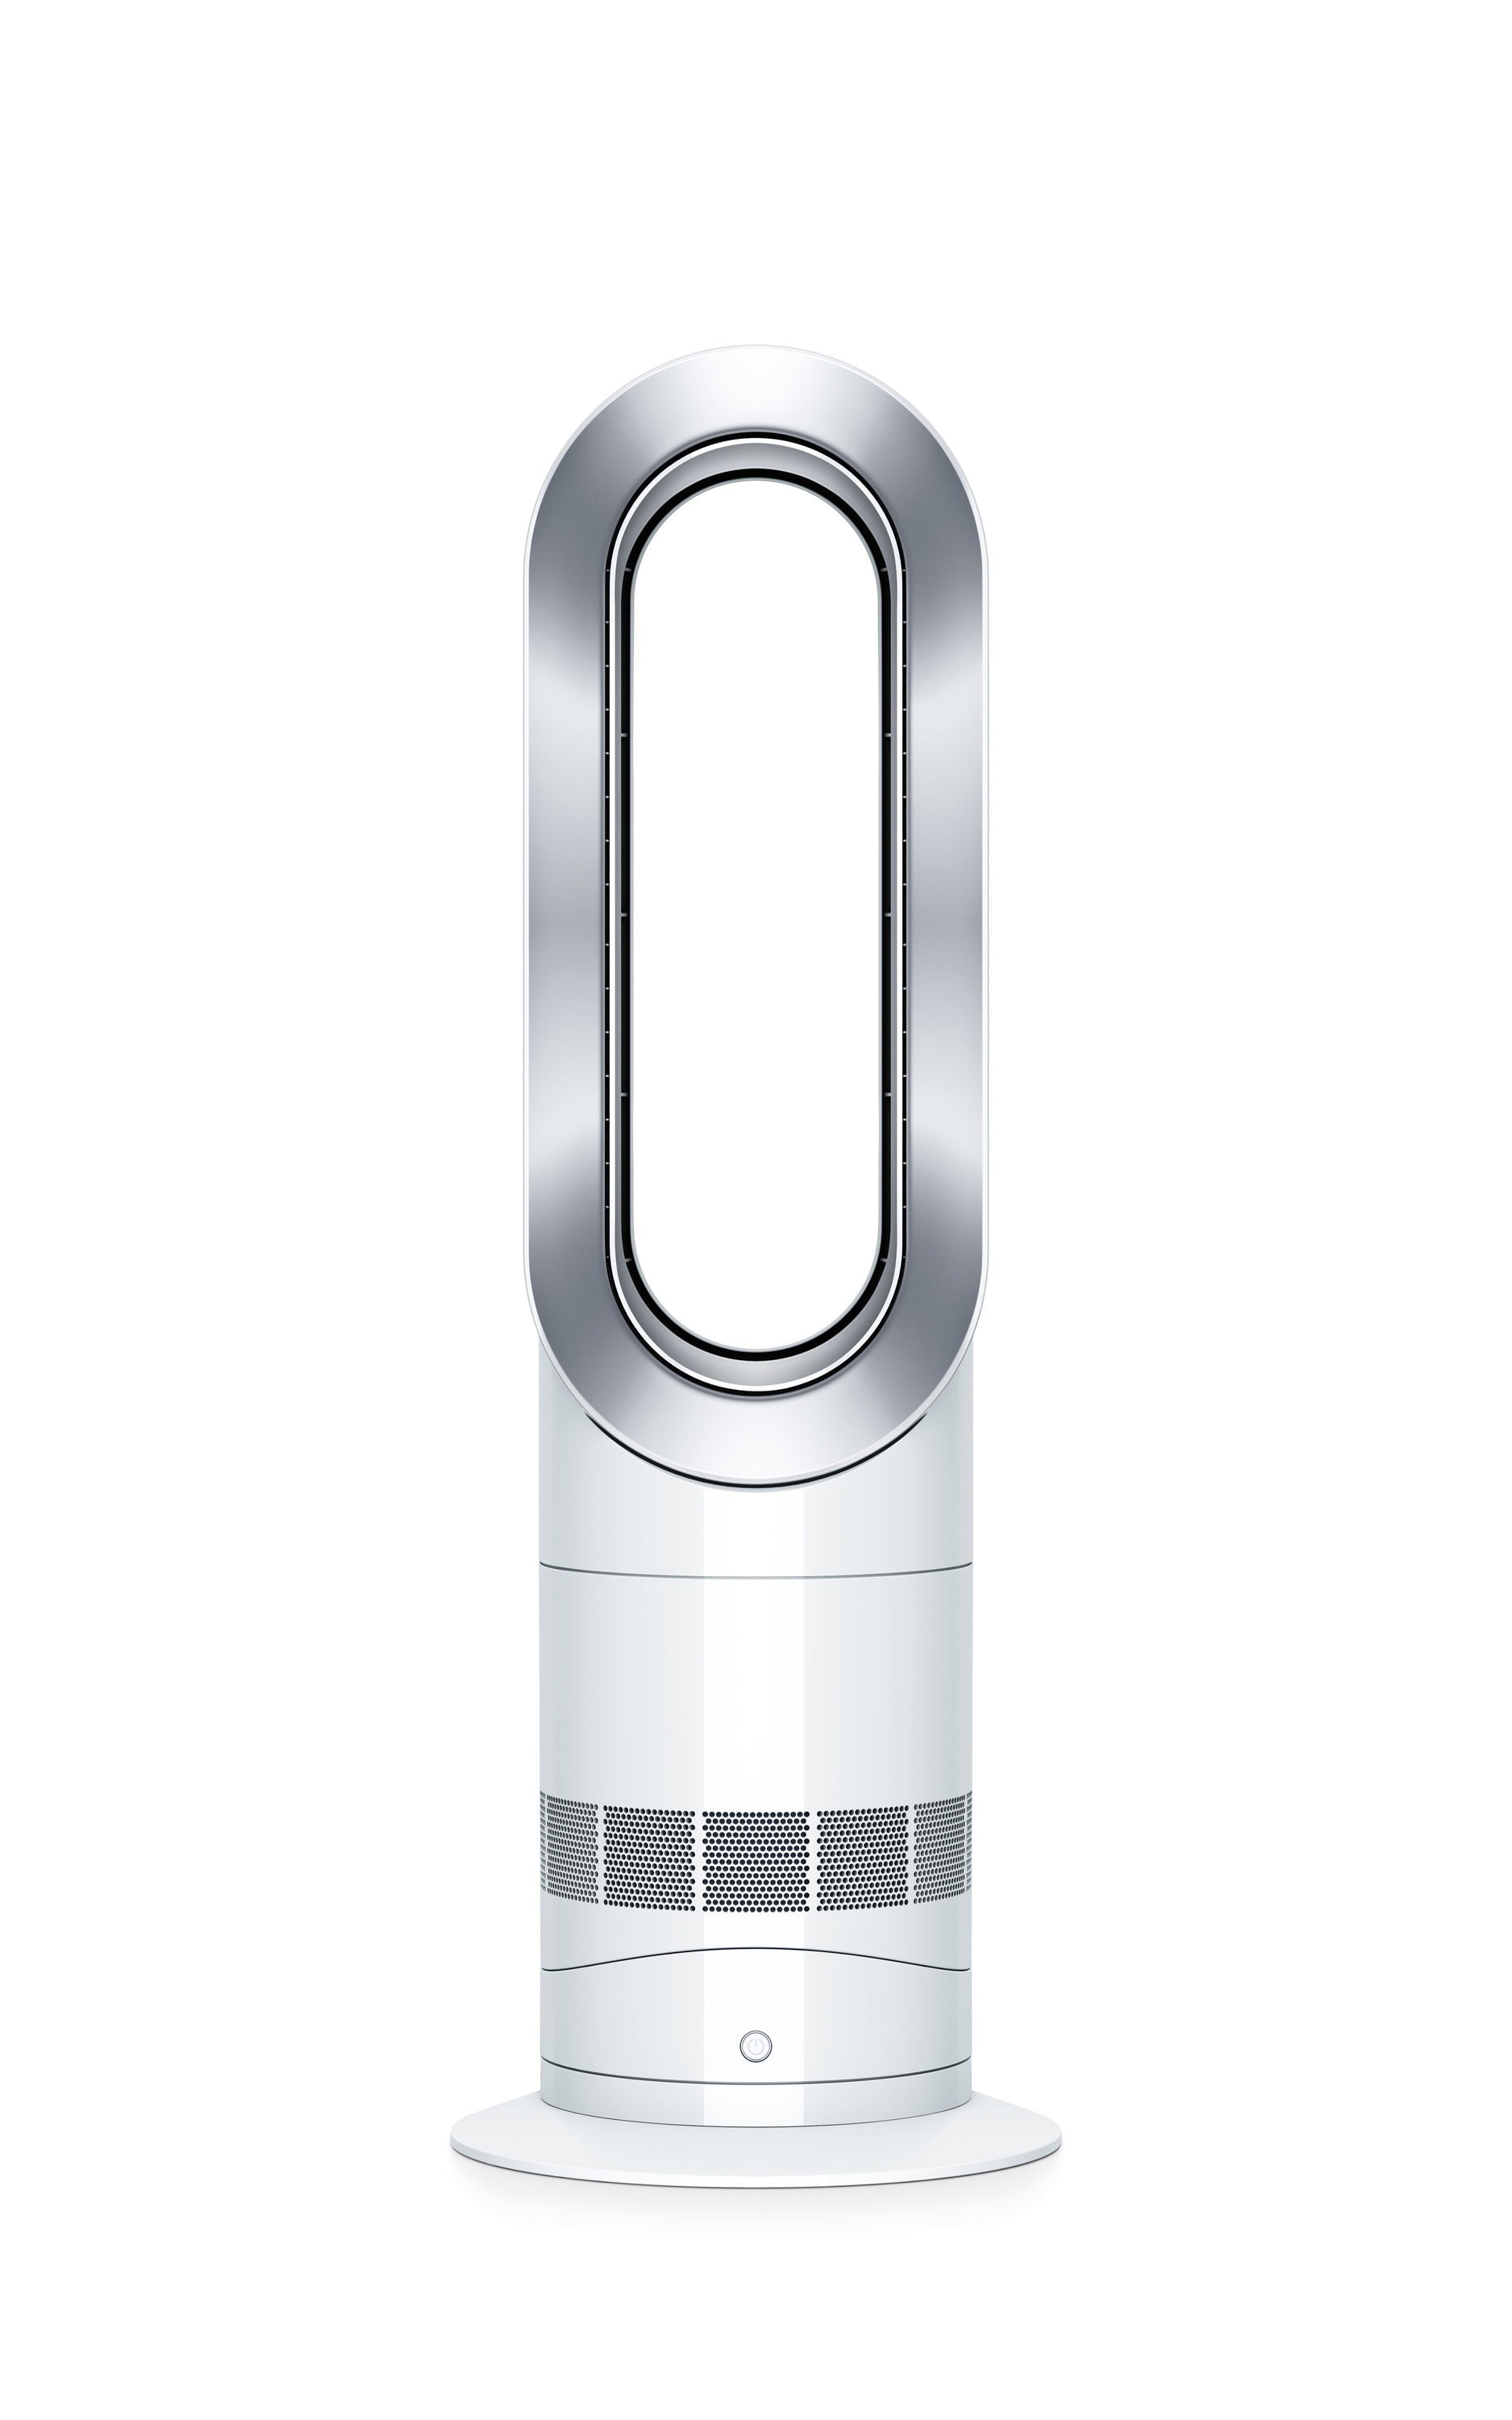 dorp Vulkanisch Razernij Dyson Up to 1500-Watt Fan Tower Indoor Electric Space Heater with  Thermostat and Remote Included at Lowes.com